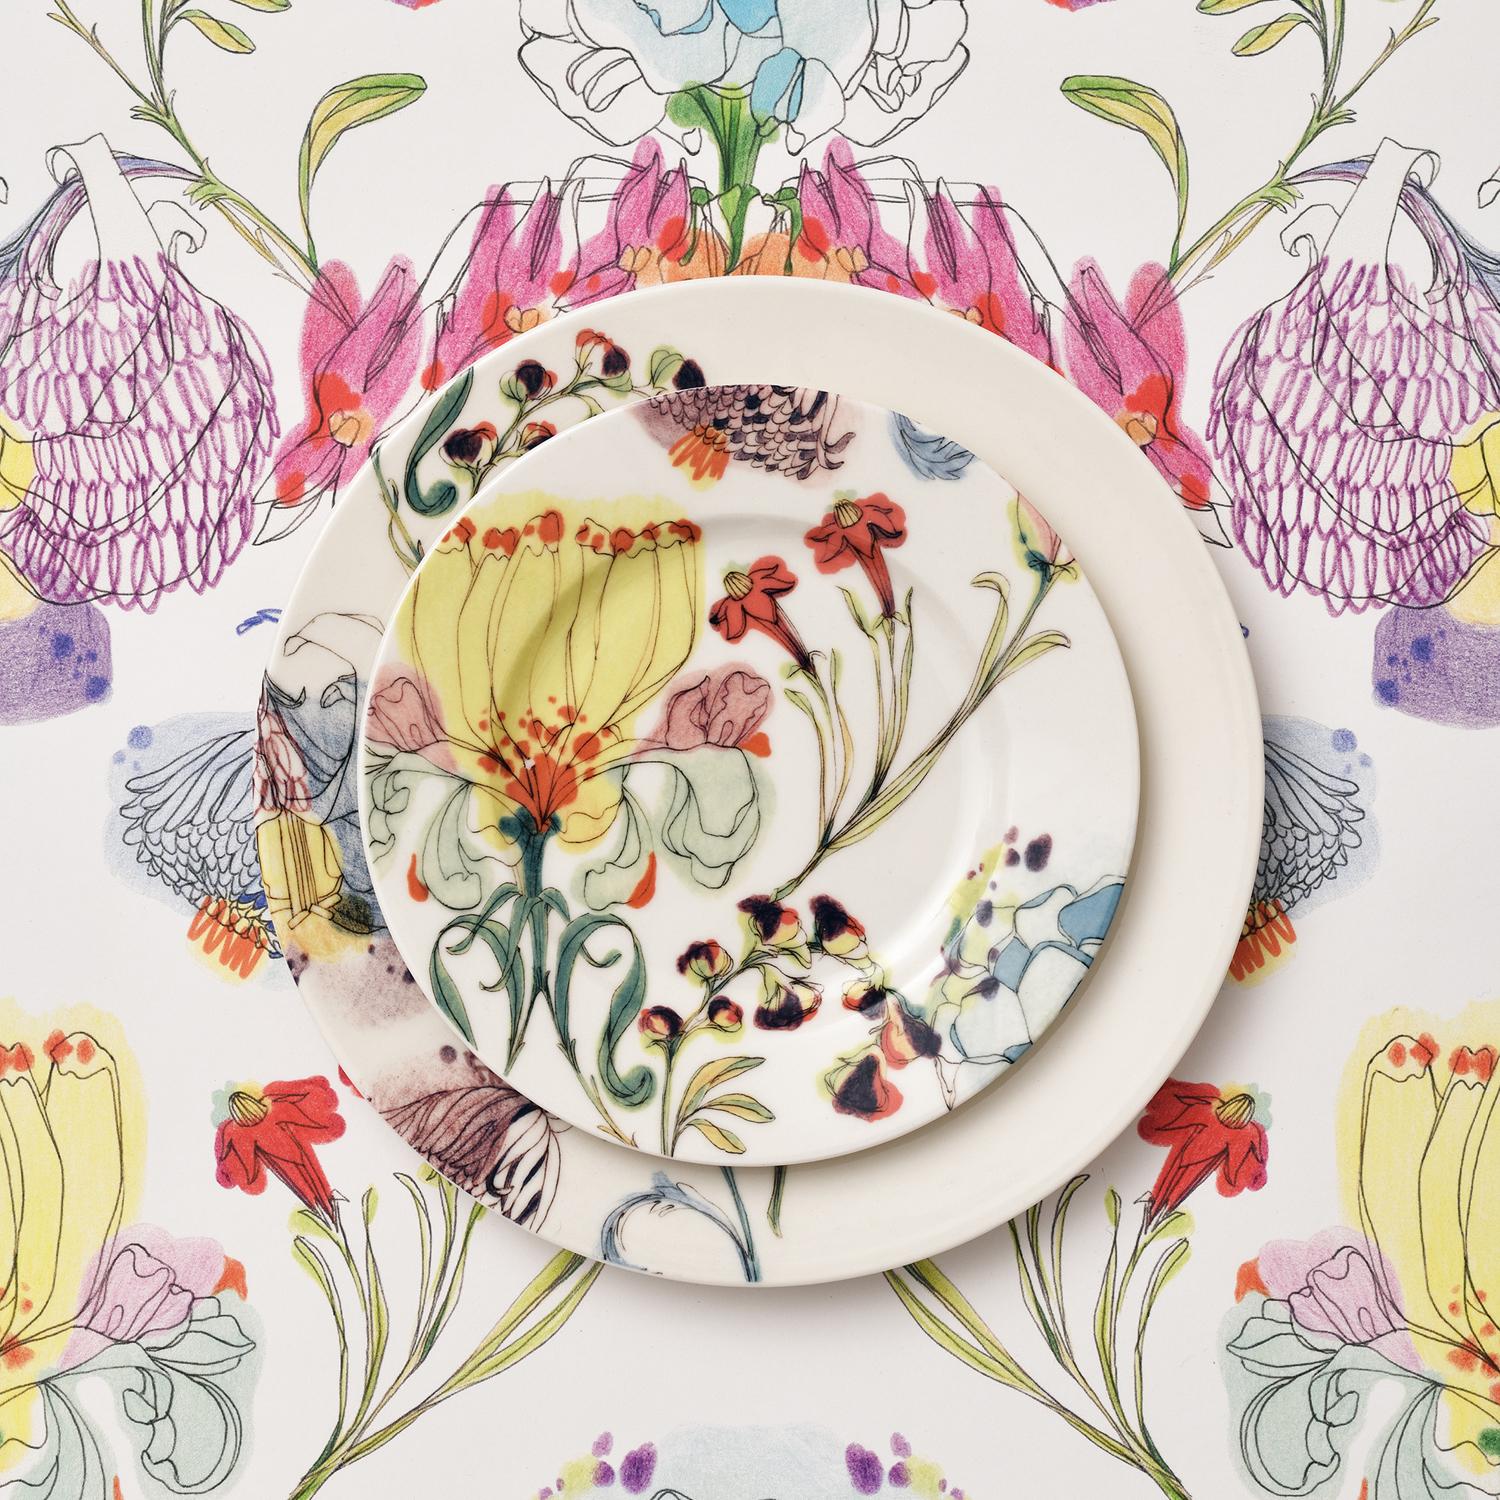 Italian The Grandma's Garden, Contemporary Porcelain Bread Plates Set with Floral Design For Sale